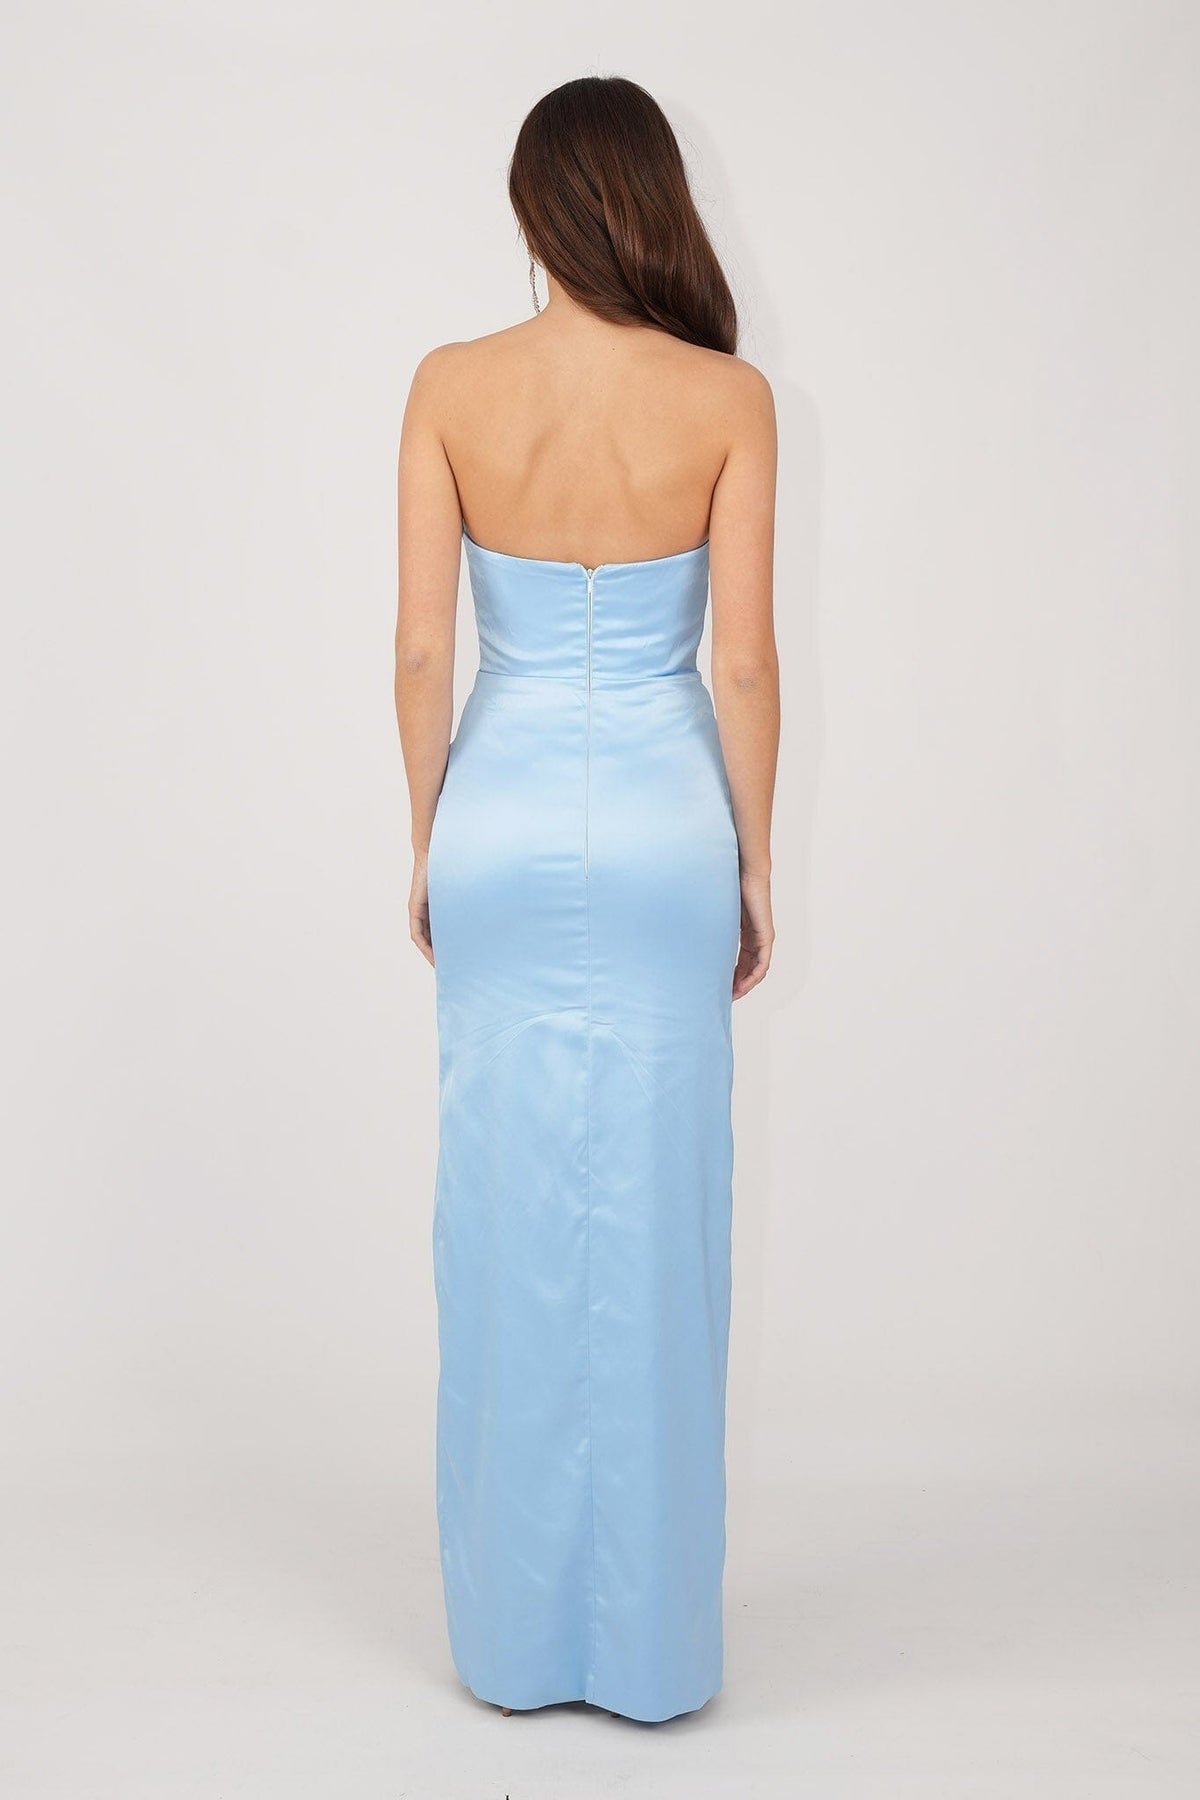 Back Image of Light Blue Satin Maxi Dress with Strapless Draped Detail Neckline, Fitted Pencil Skirt and Thigh High Side Split